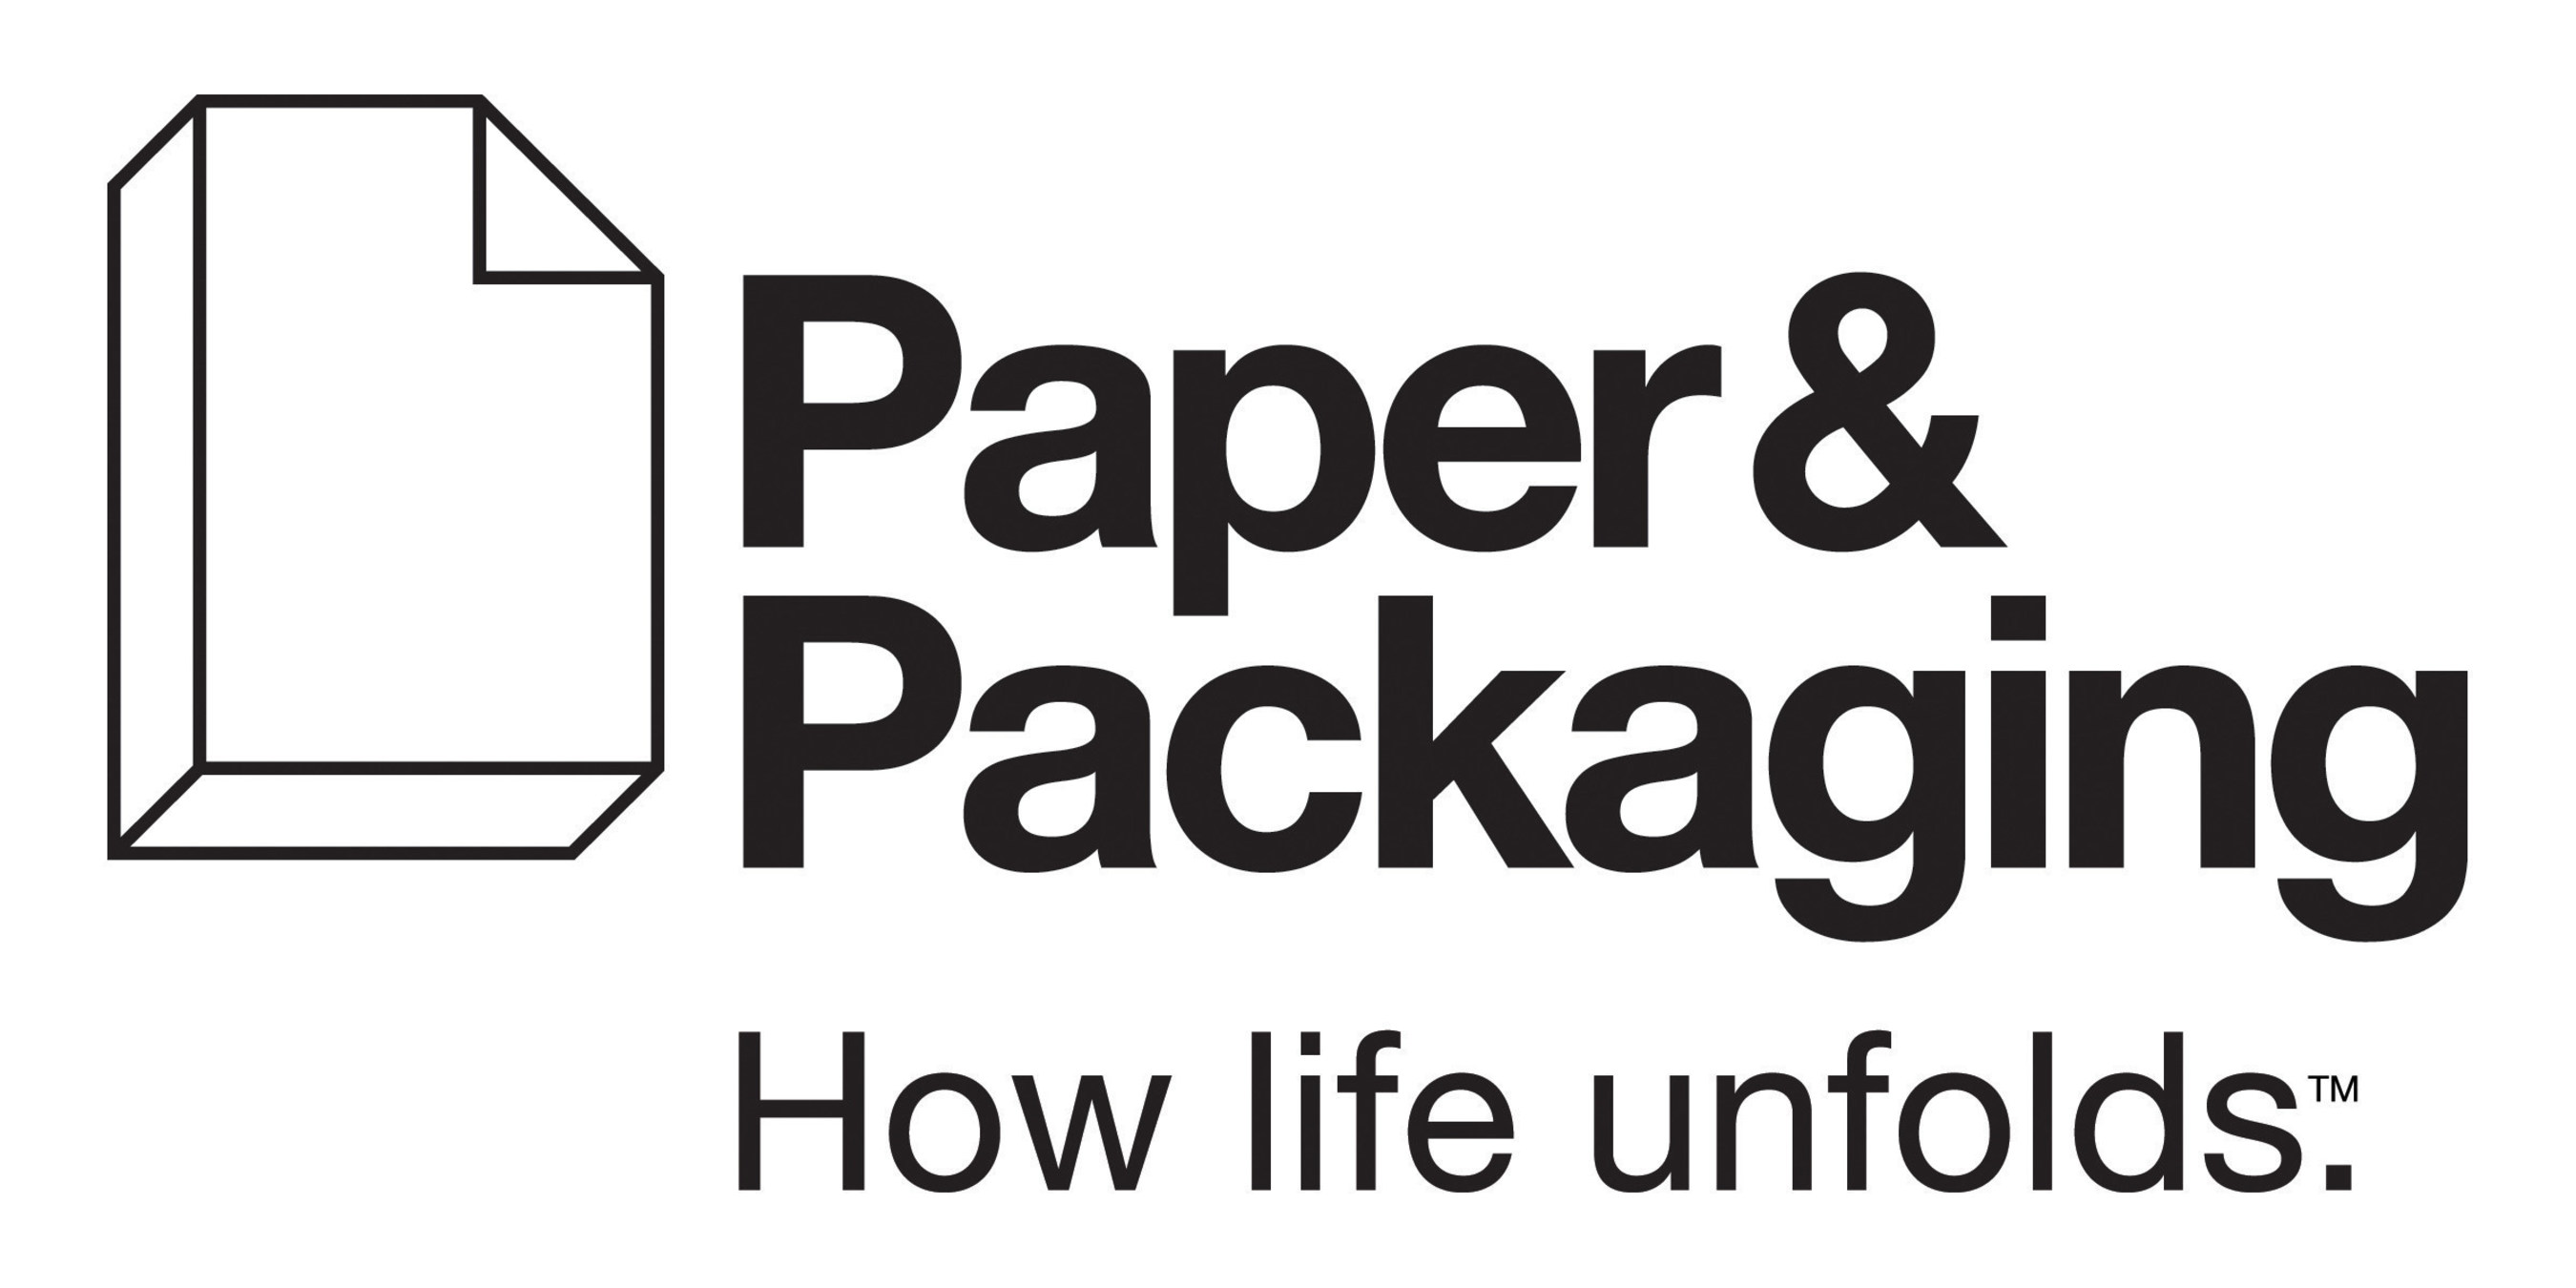 Paper & Packaging - How Life Unfolds